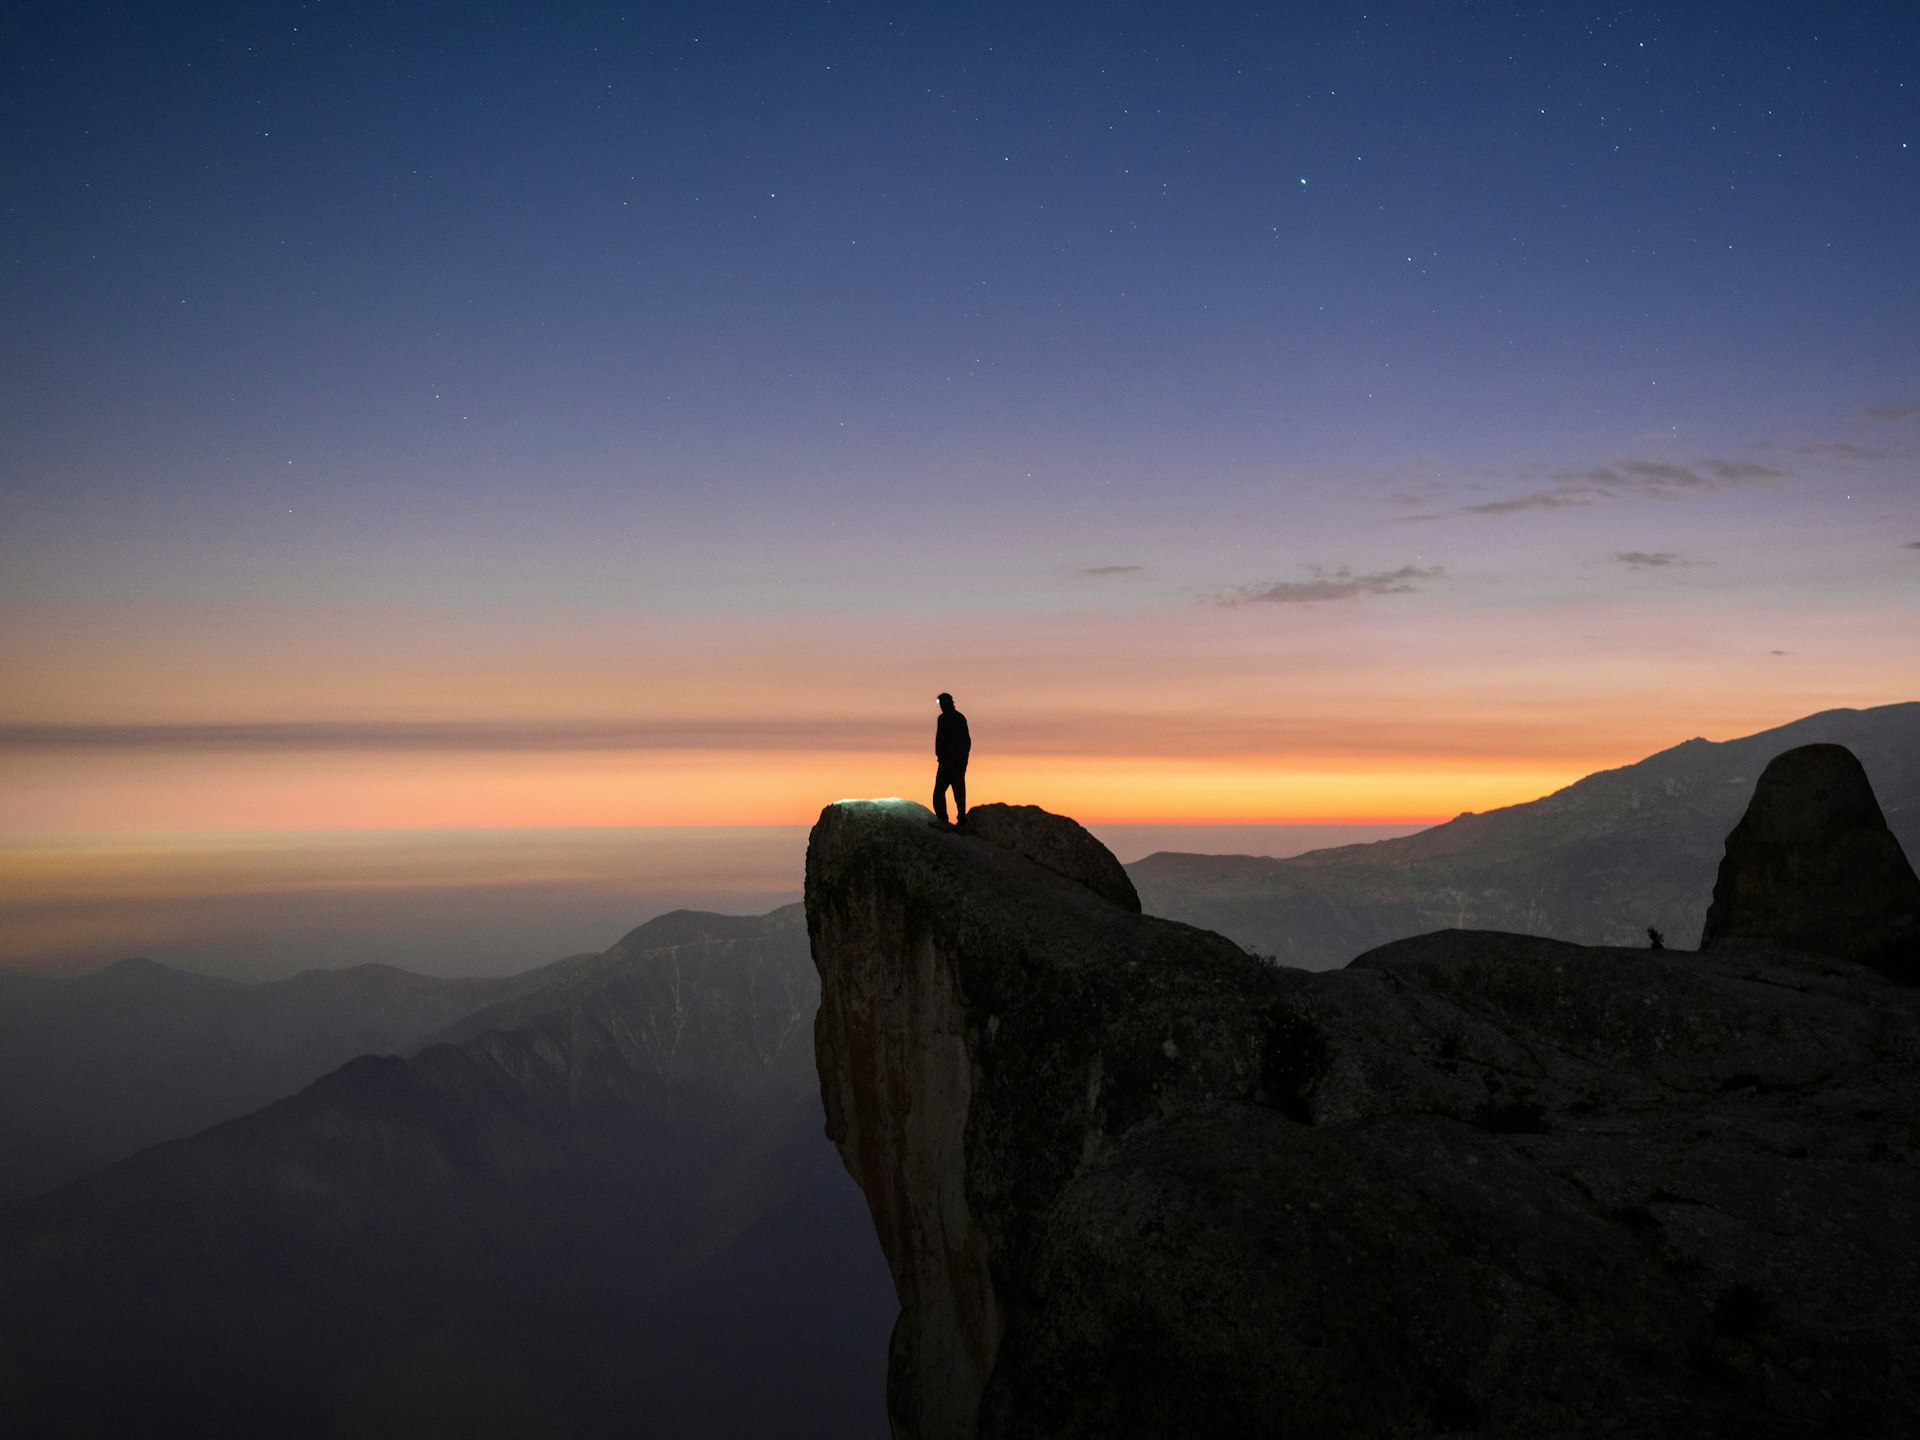 A hiker at dusk in Marcahuasi, a plateau in the Andes Mountains